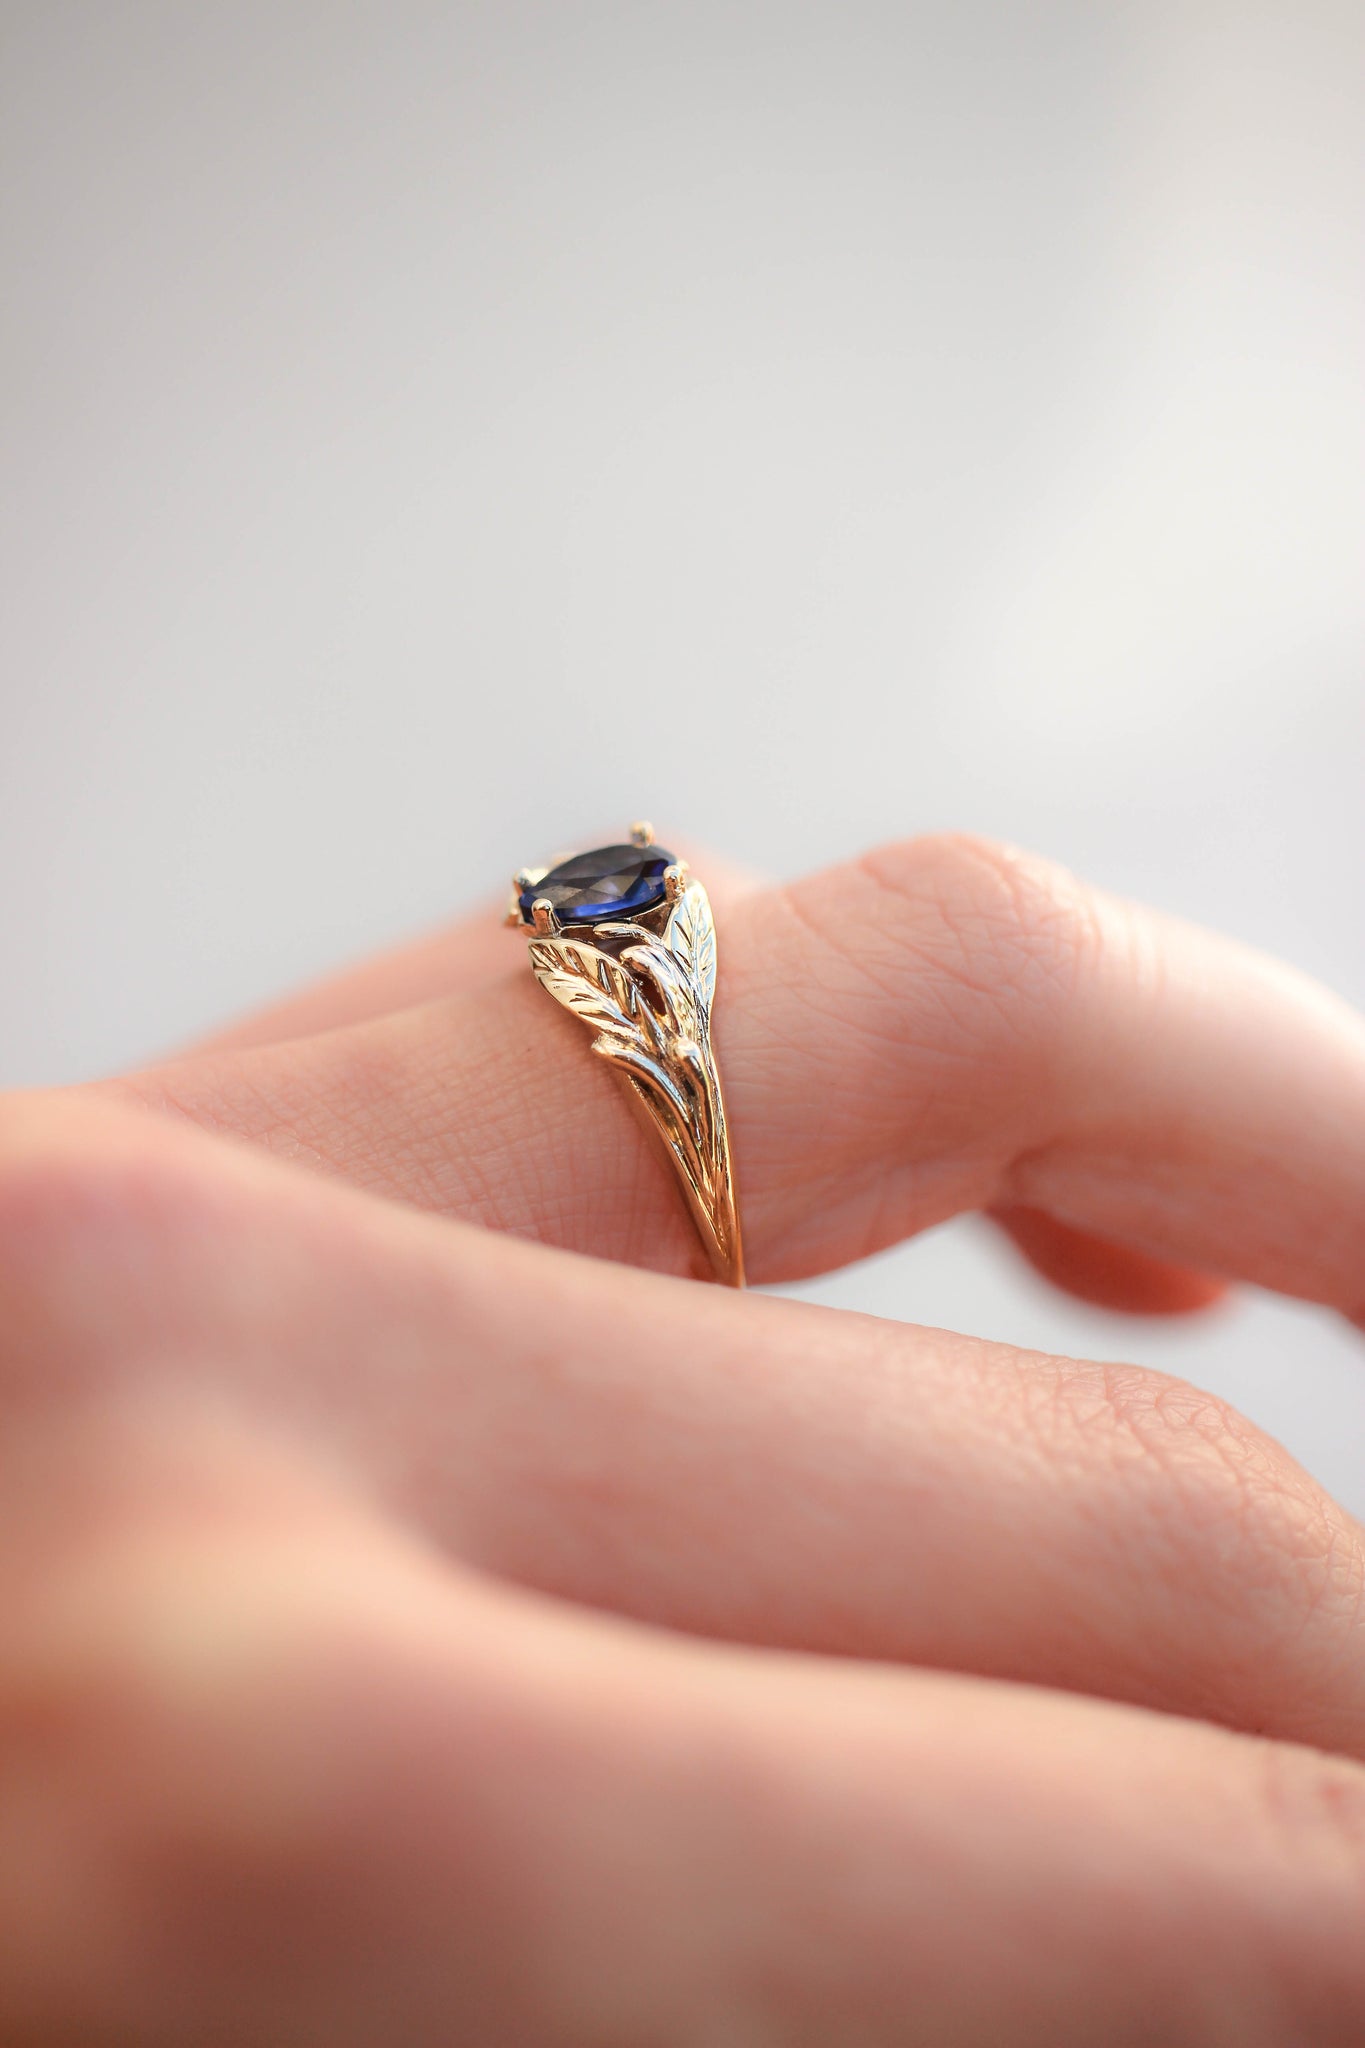 Blue lab sapphire ring, gold leaves engagement ring / Wisteria - Eden Garden Jewelry™